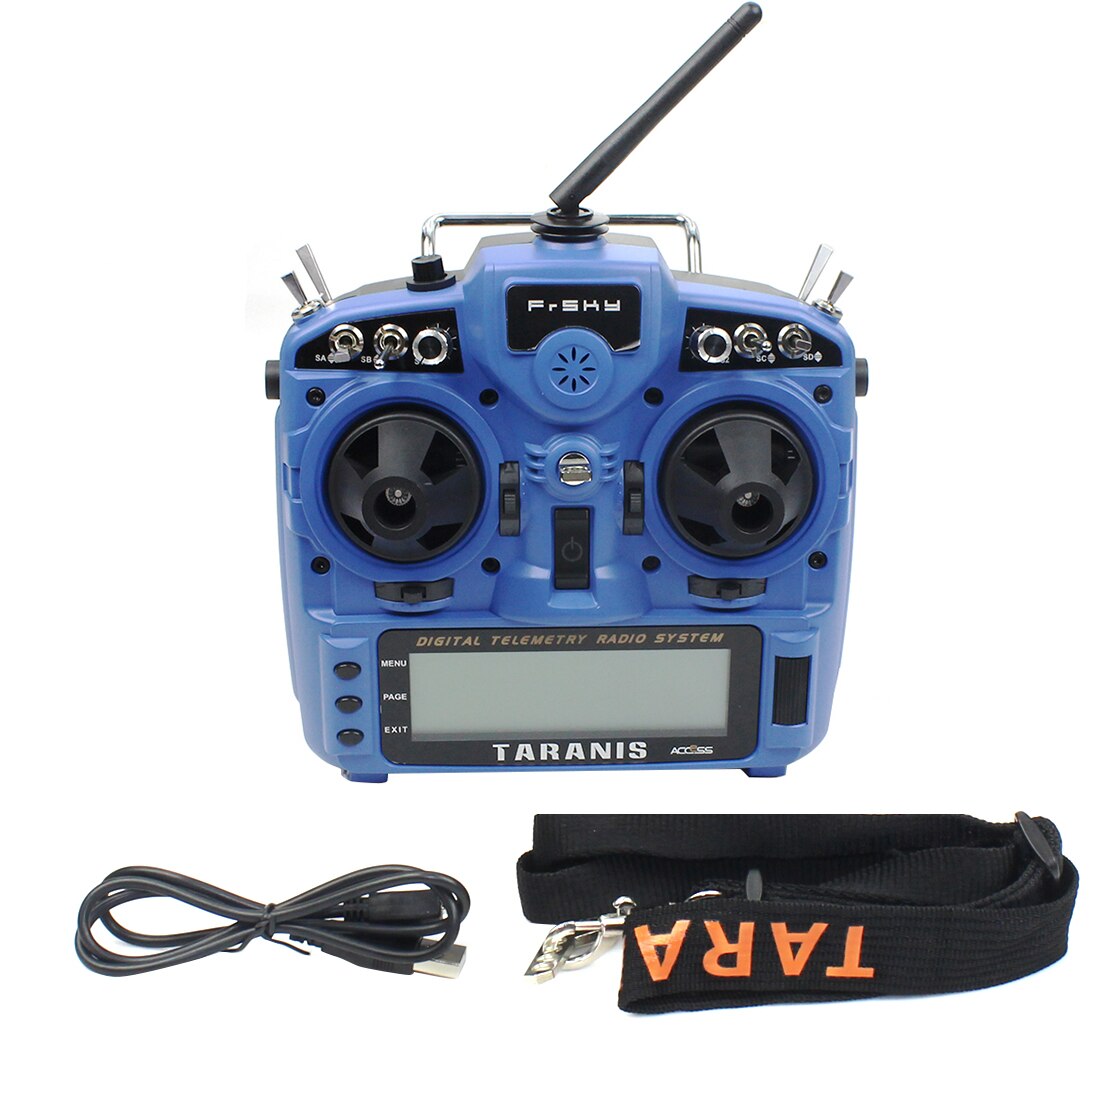 FRSKY X9D PLUS 2019 ACCESS / ACCST D16 Wireless Training Radio With ARCHER X8R Receiver